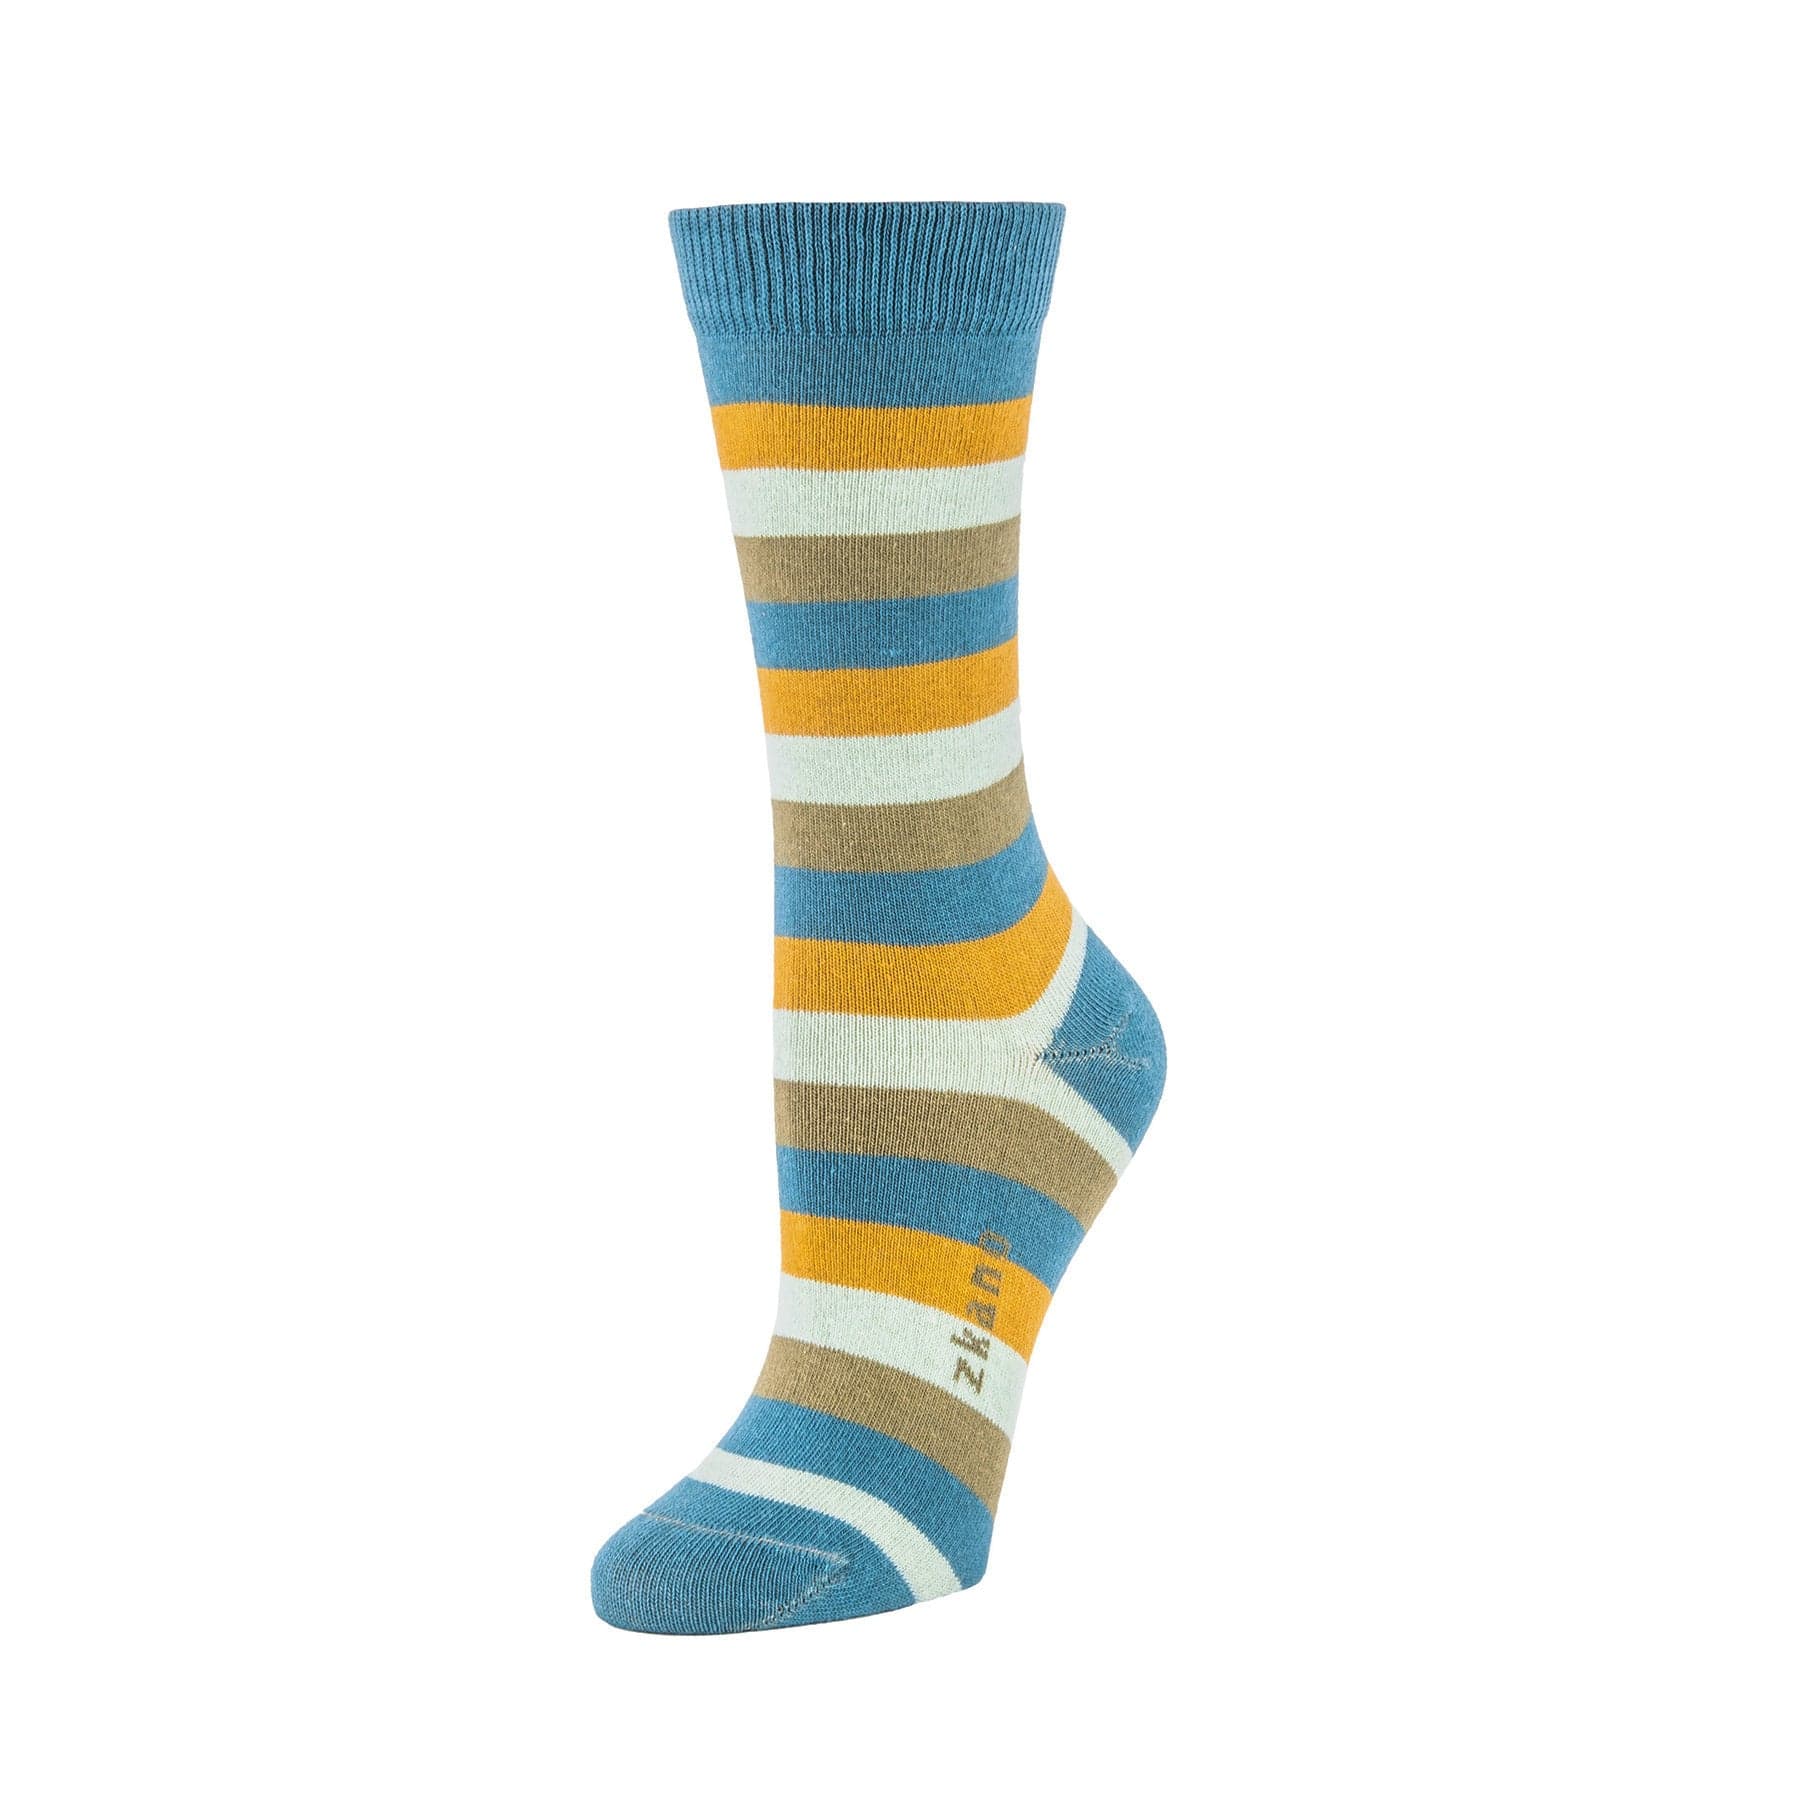 Charlotte Socks in Teal from Zkano – MooShoes